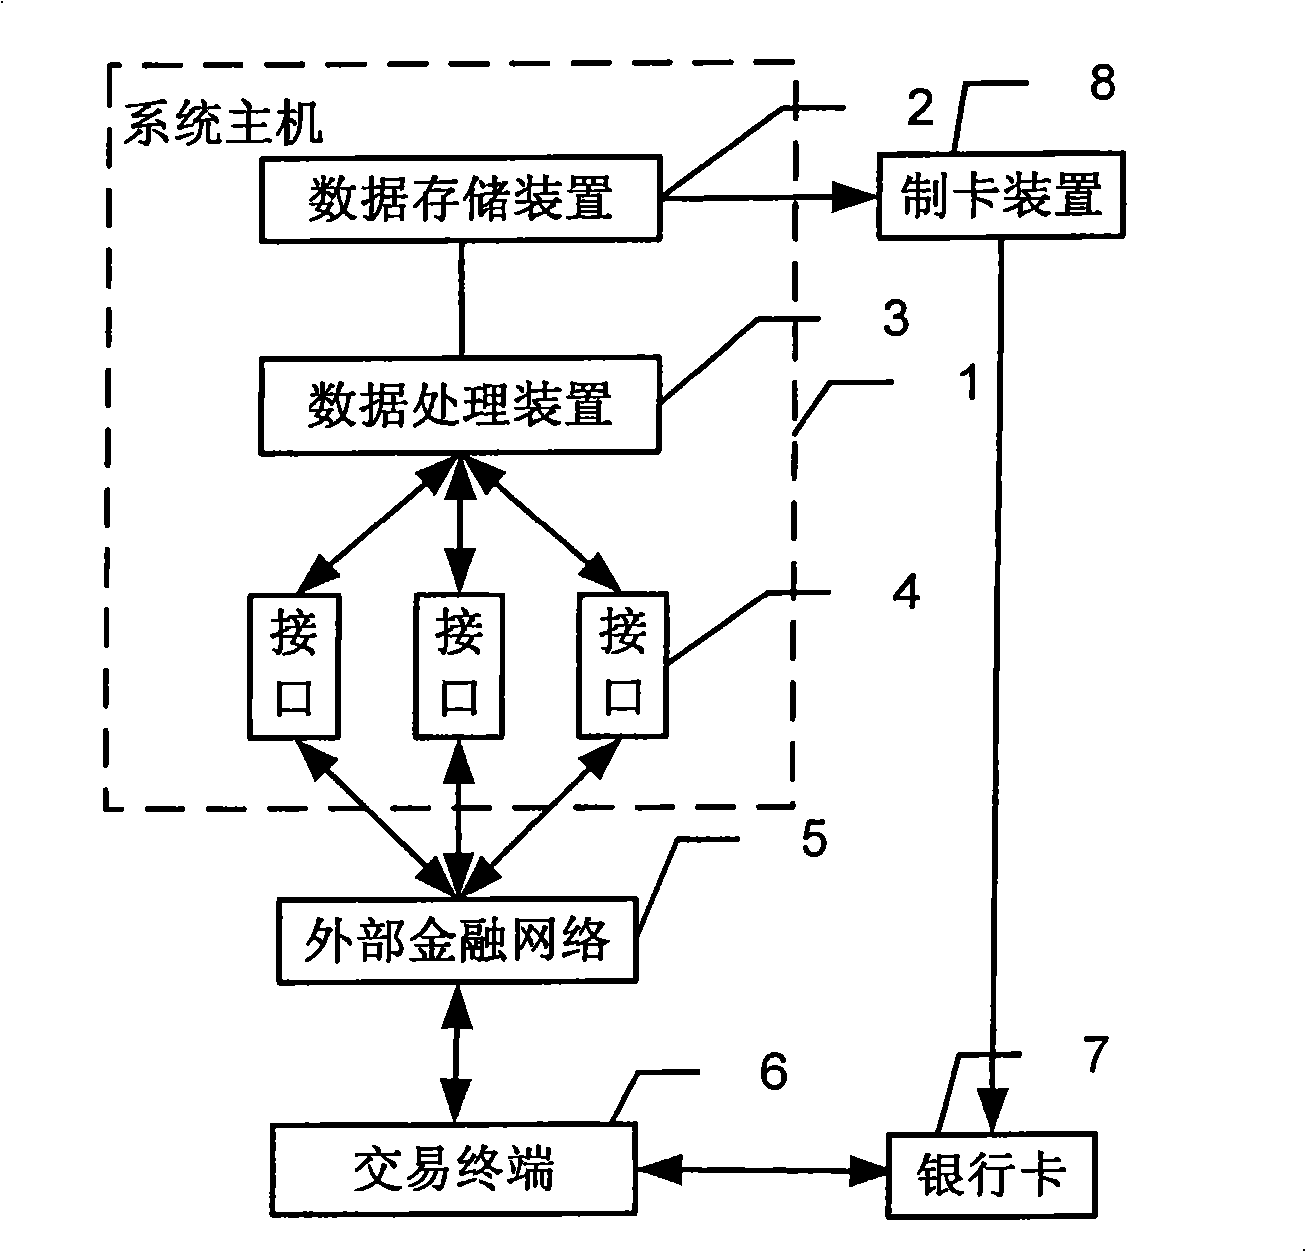 Method, apparatus, system for processing user information based on personal bank card and bank card